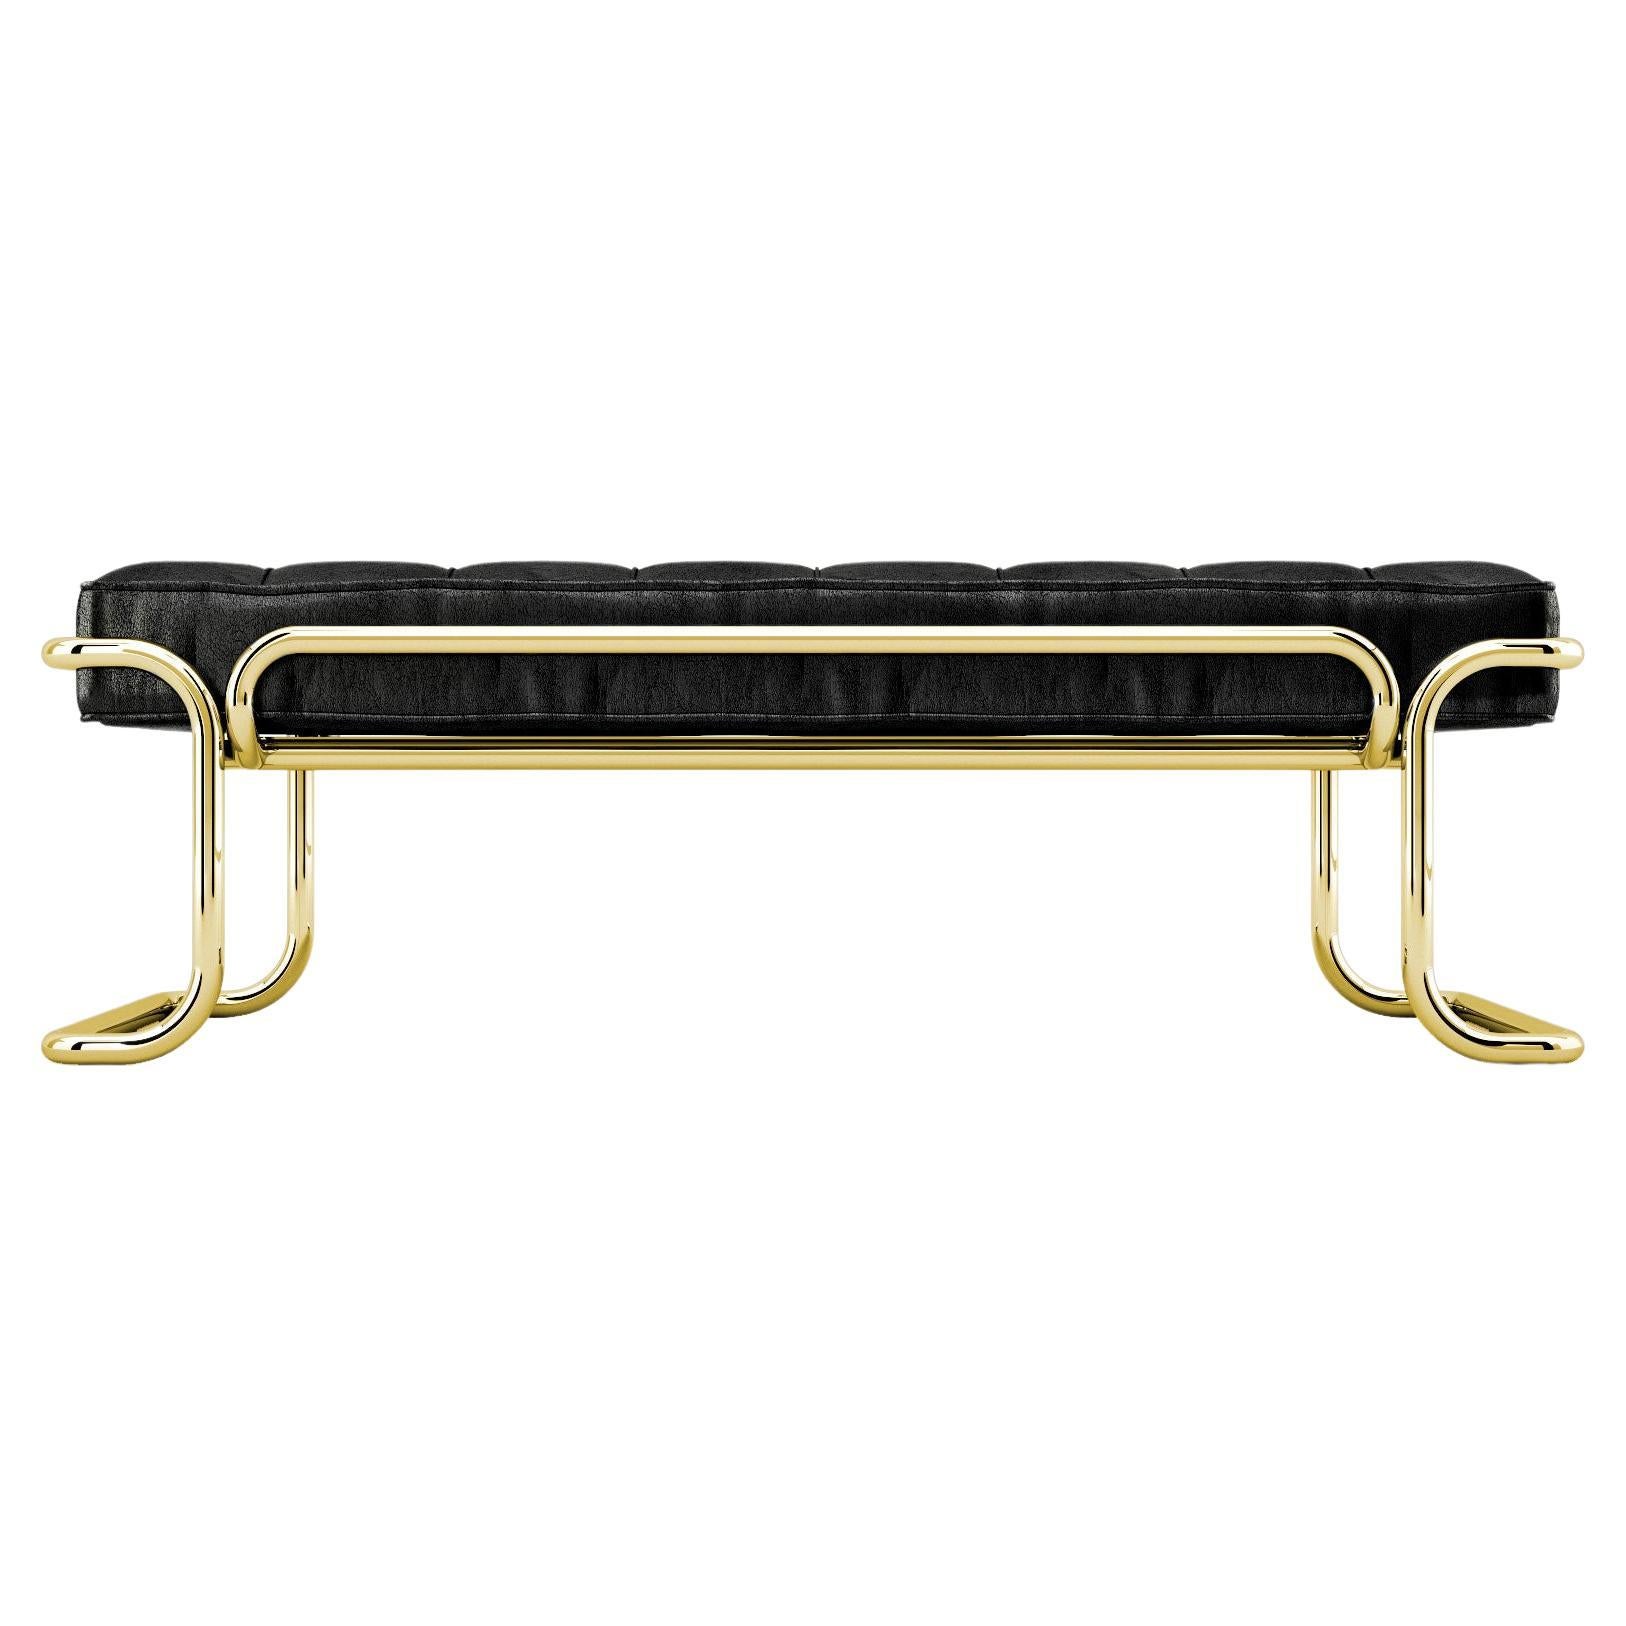 Lotus Banquette - Modern Black Leather Sofa with Brass Legs